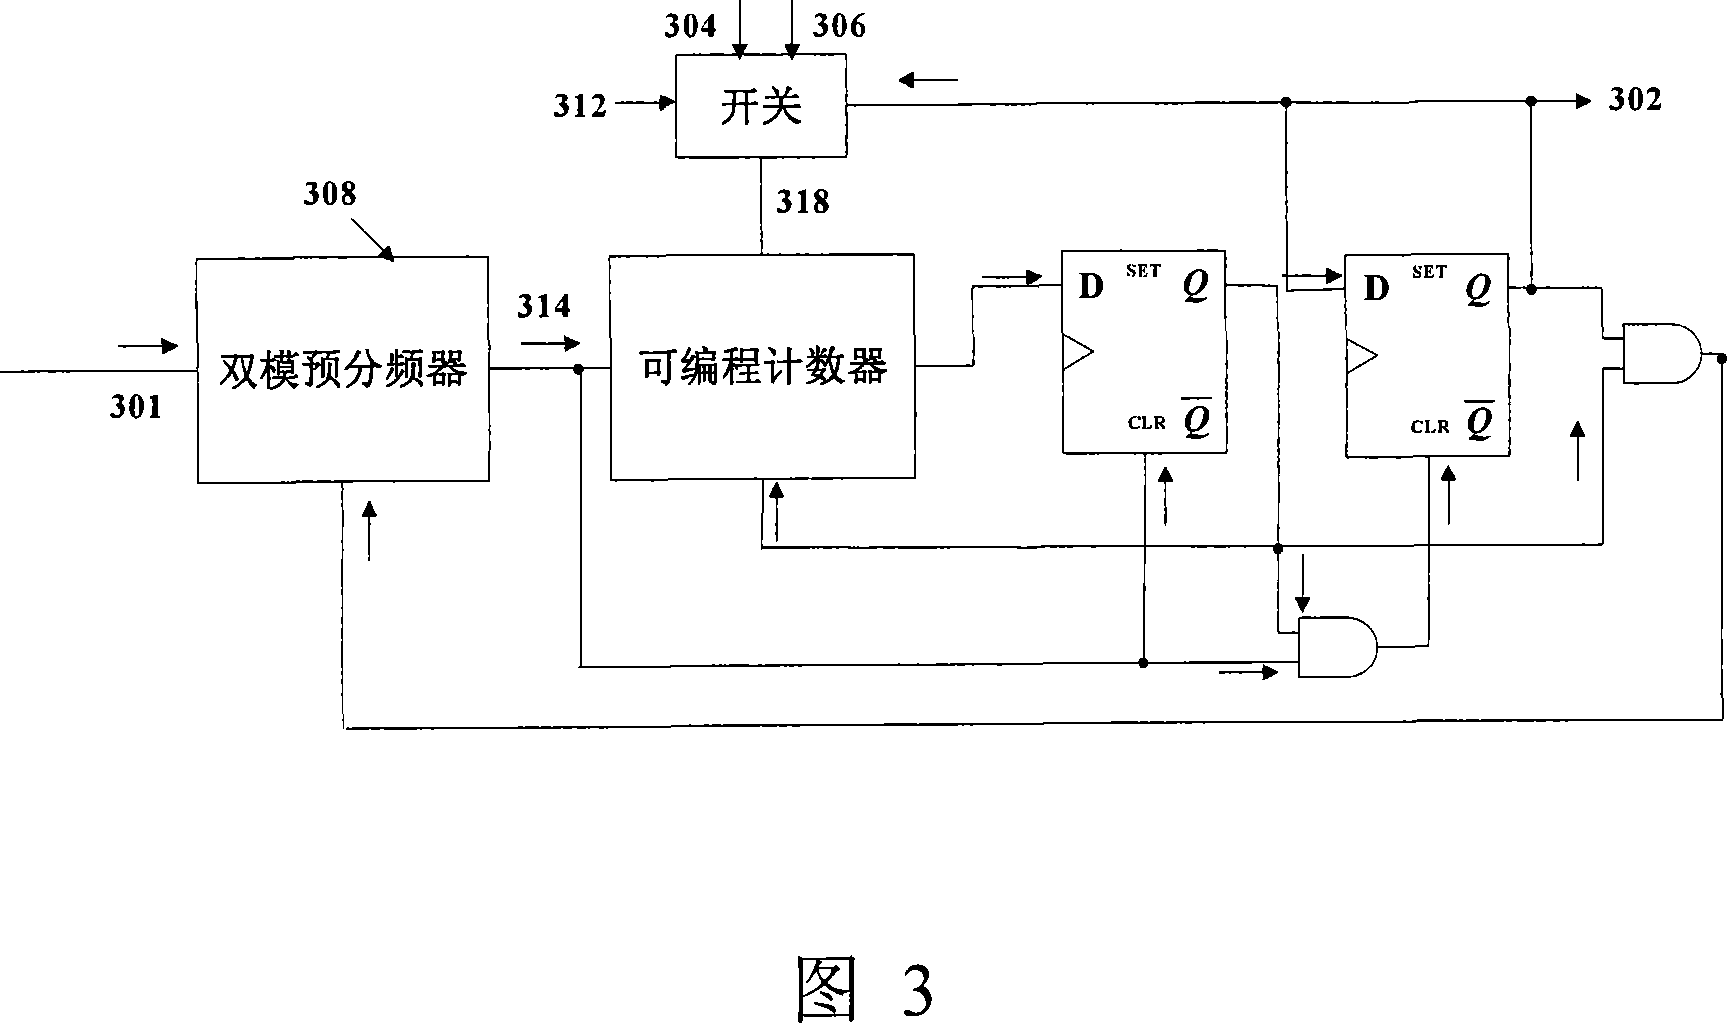 A dual-mode frequency divider